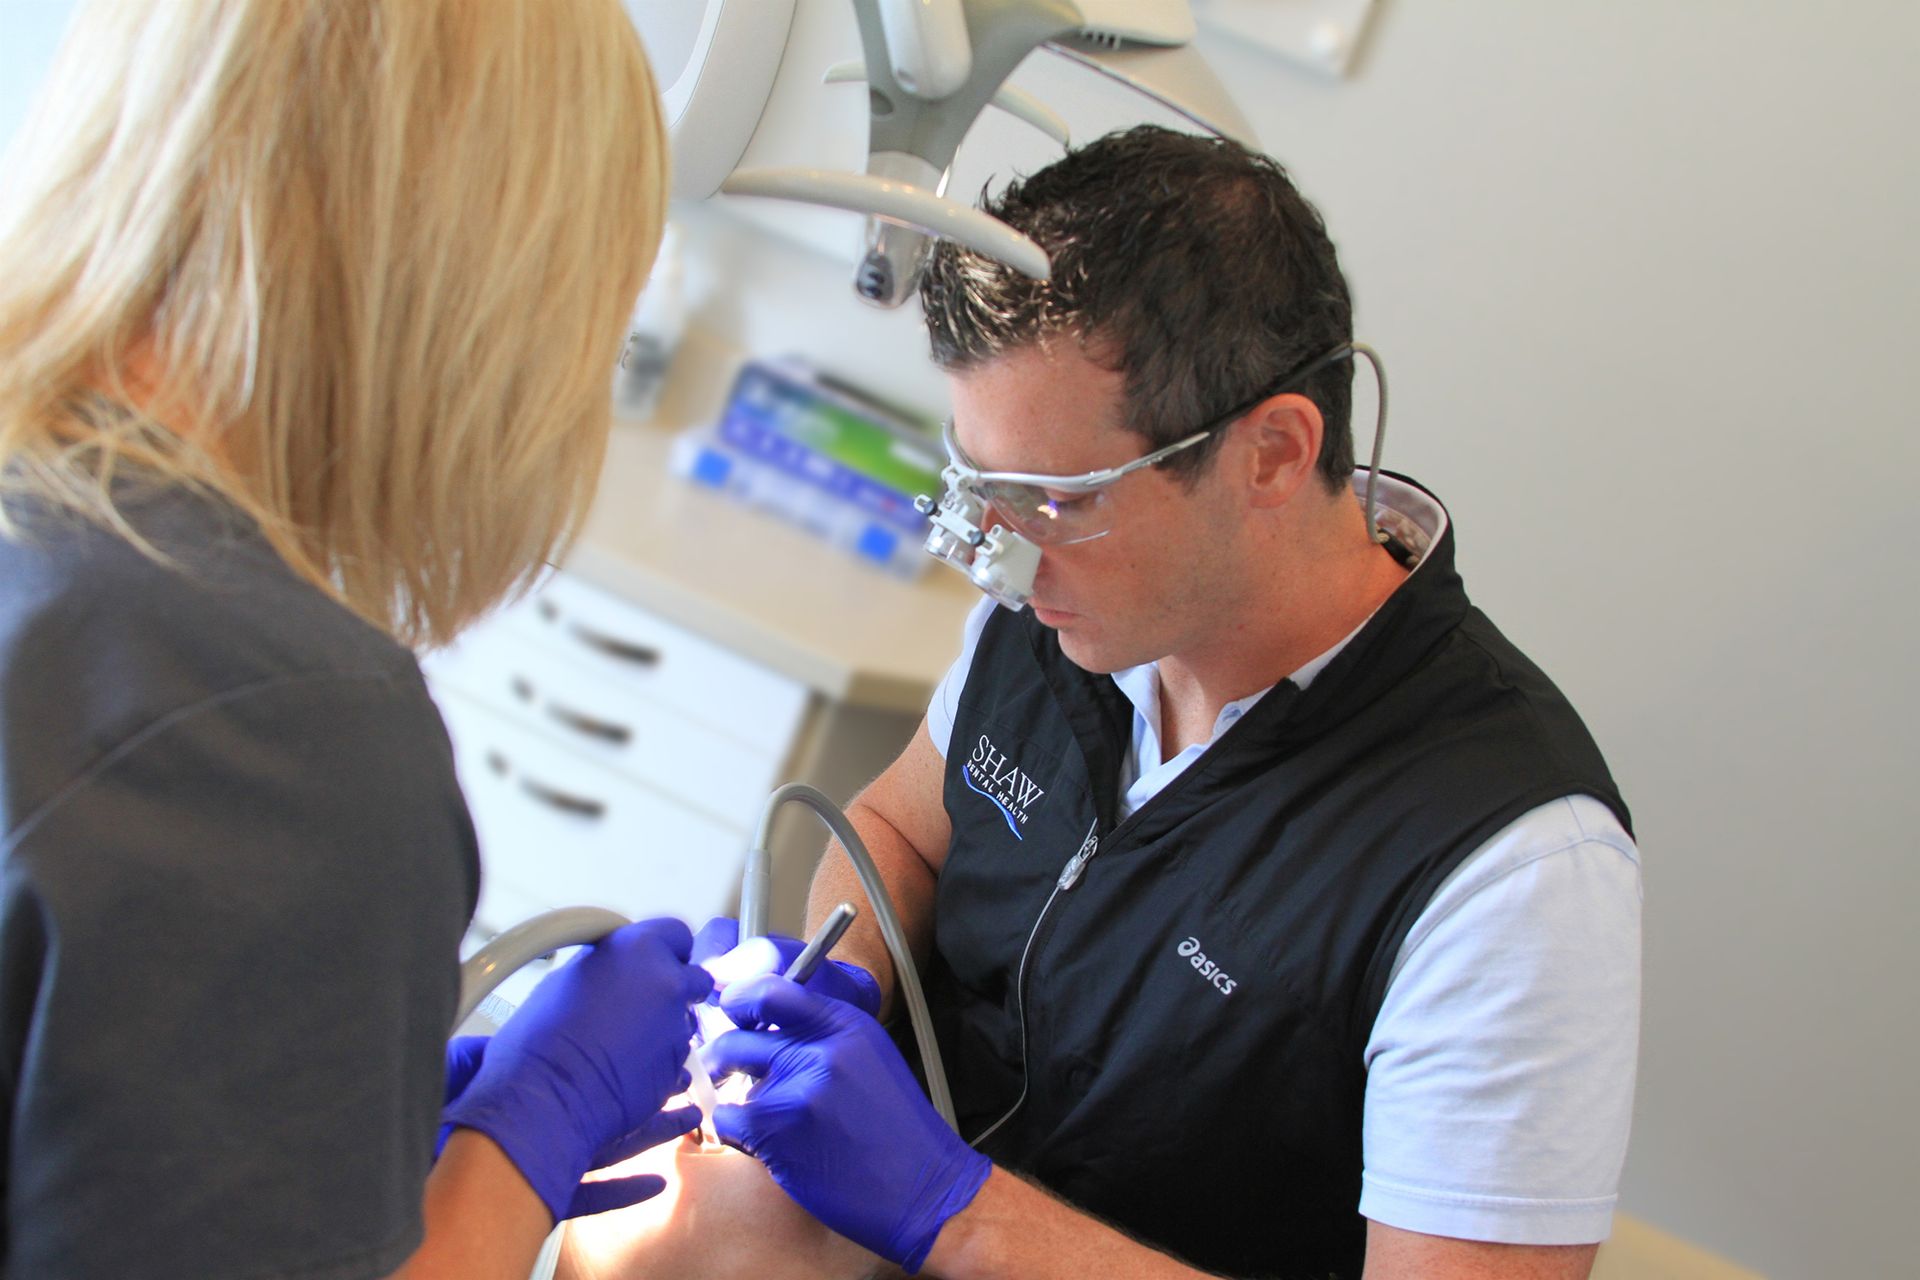 A dentist is examining a patient 's teeth in a dental office